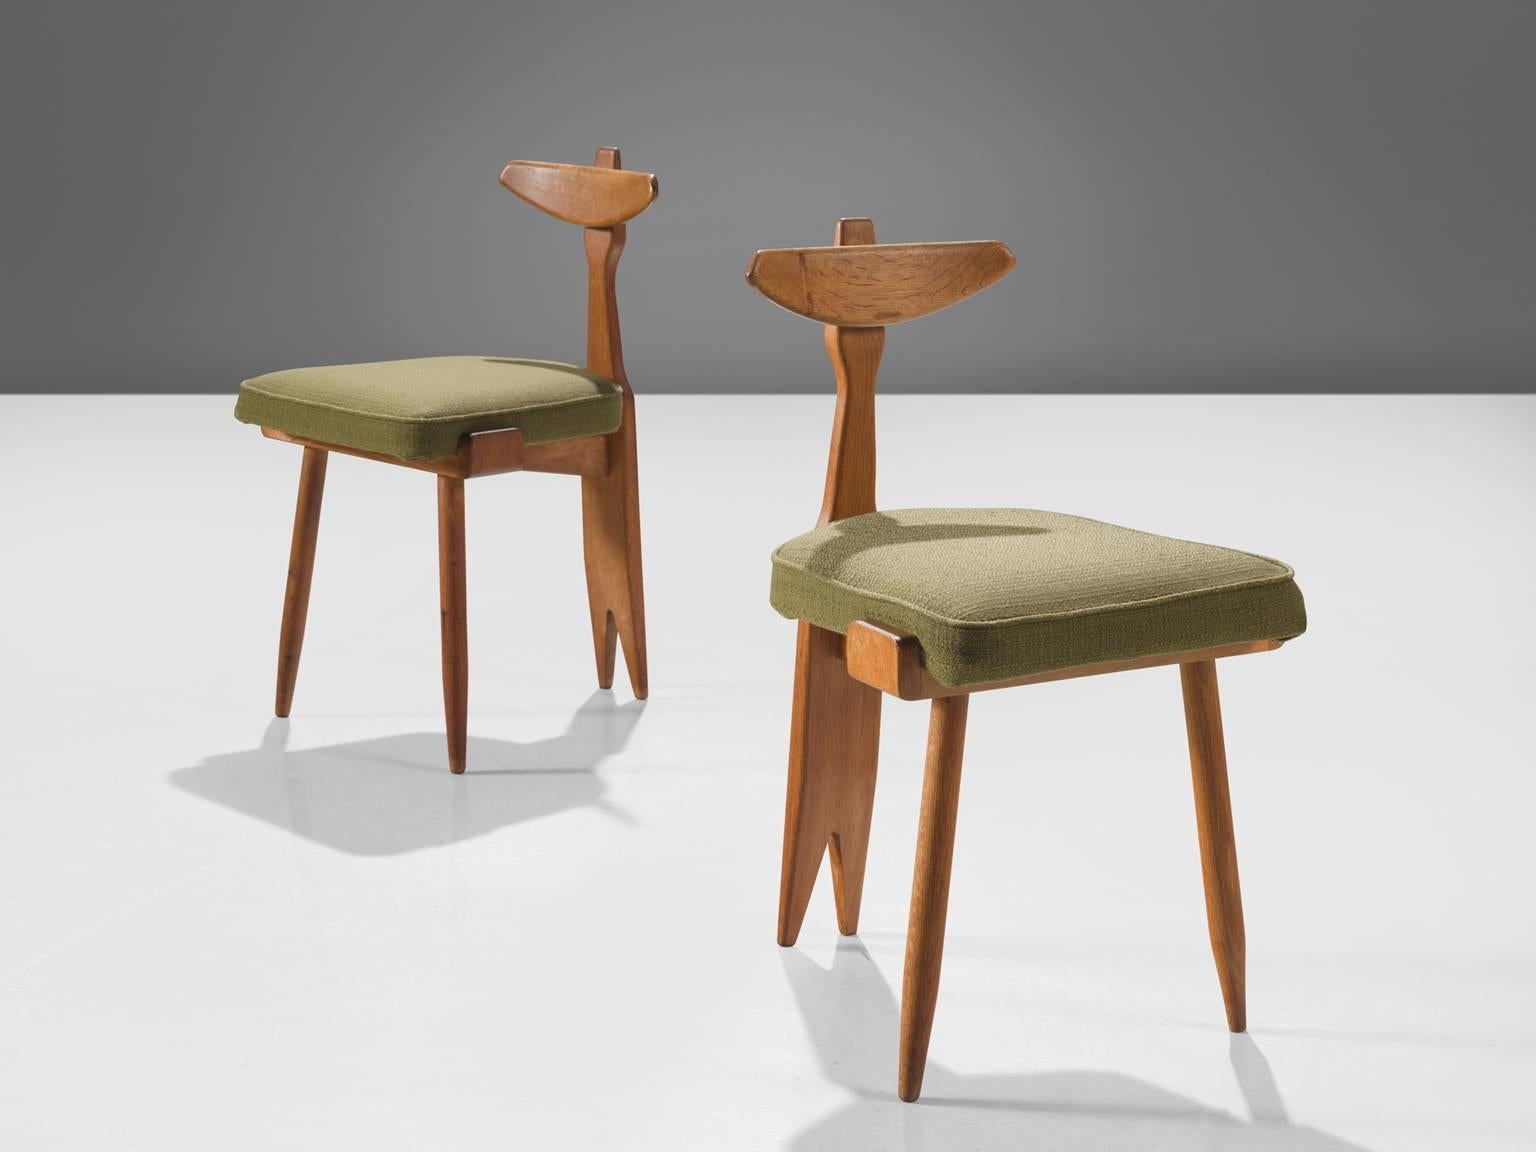 Guillerme et Chambron, oak and green fabric, France, circa 1950

This delicate set of side chairs are executed in in oak and green fabric. This chair displays the characteristic frame of this French designer duo. The chairs feature tapered legs